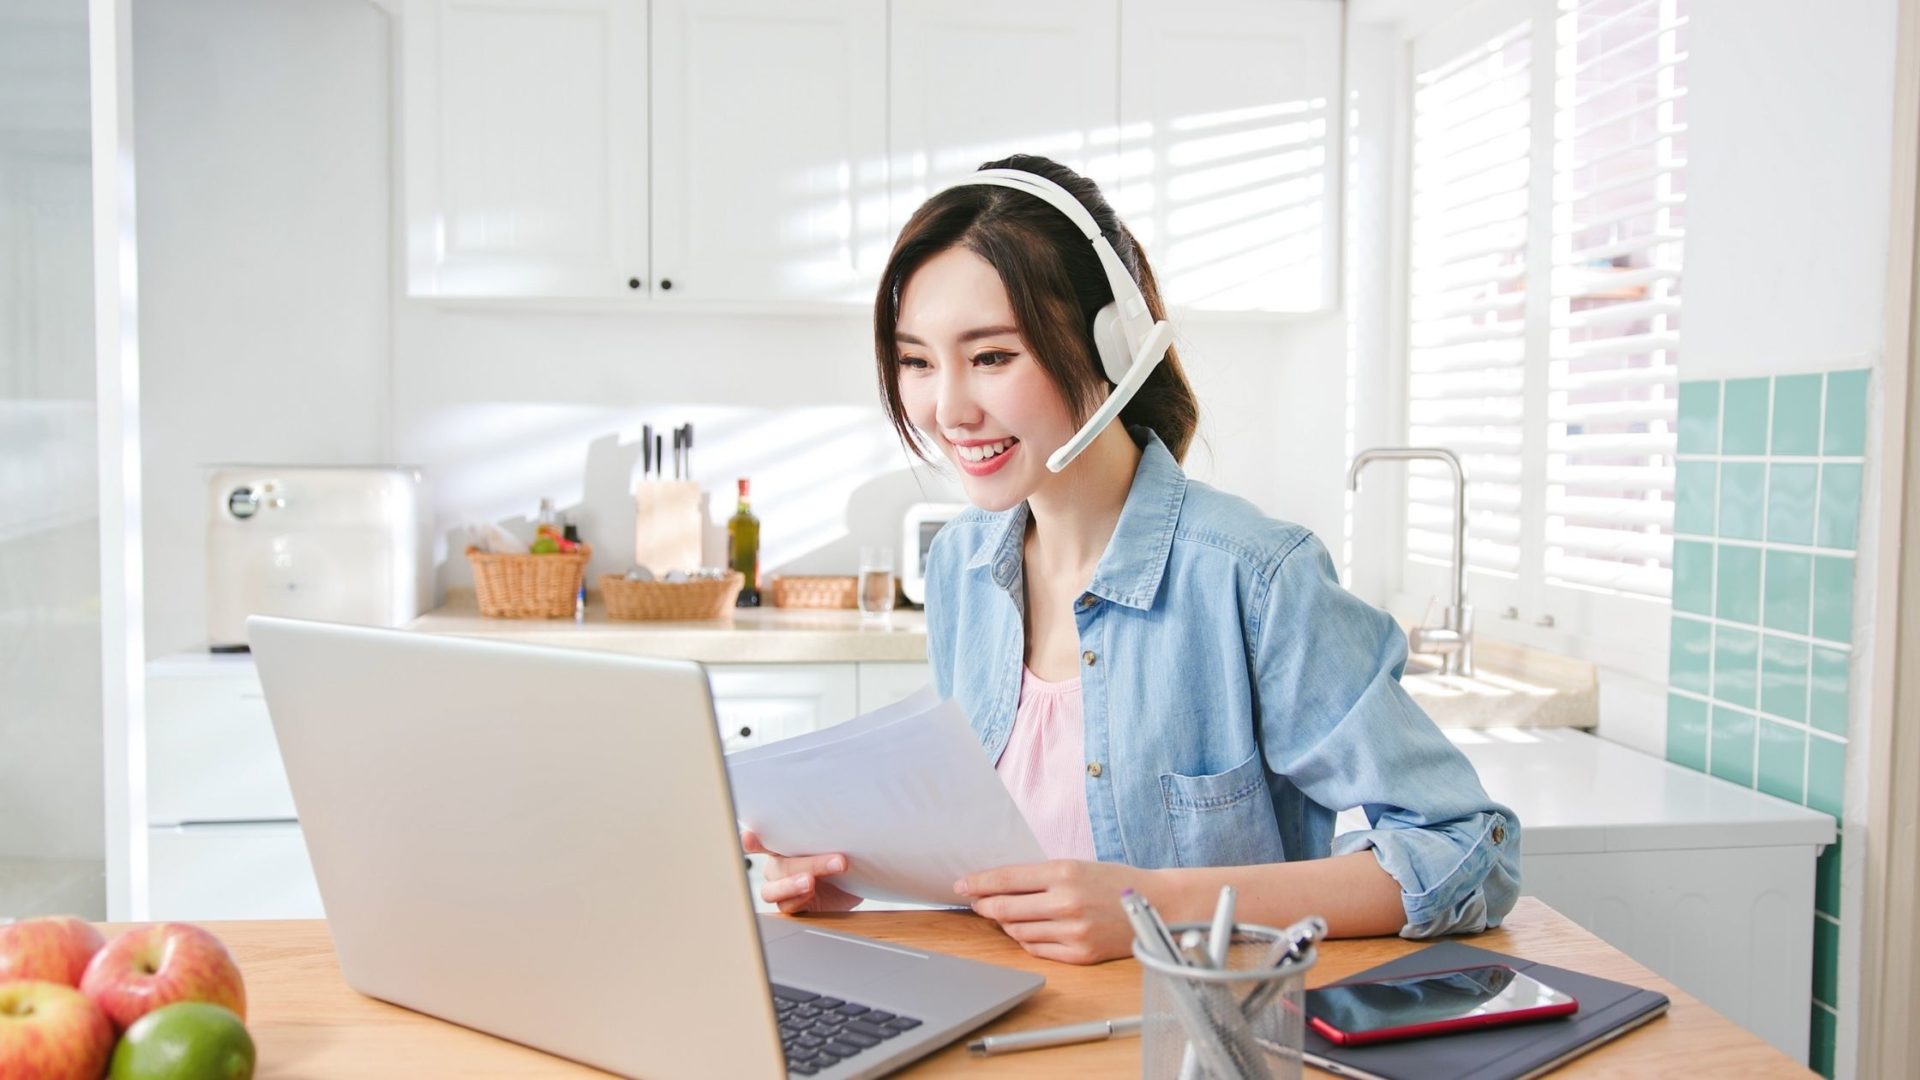 What Are The Benefits Of A Virtual Receptionist?